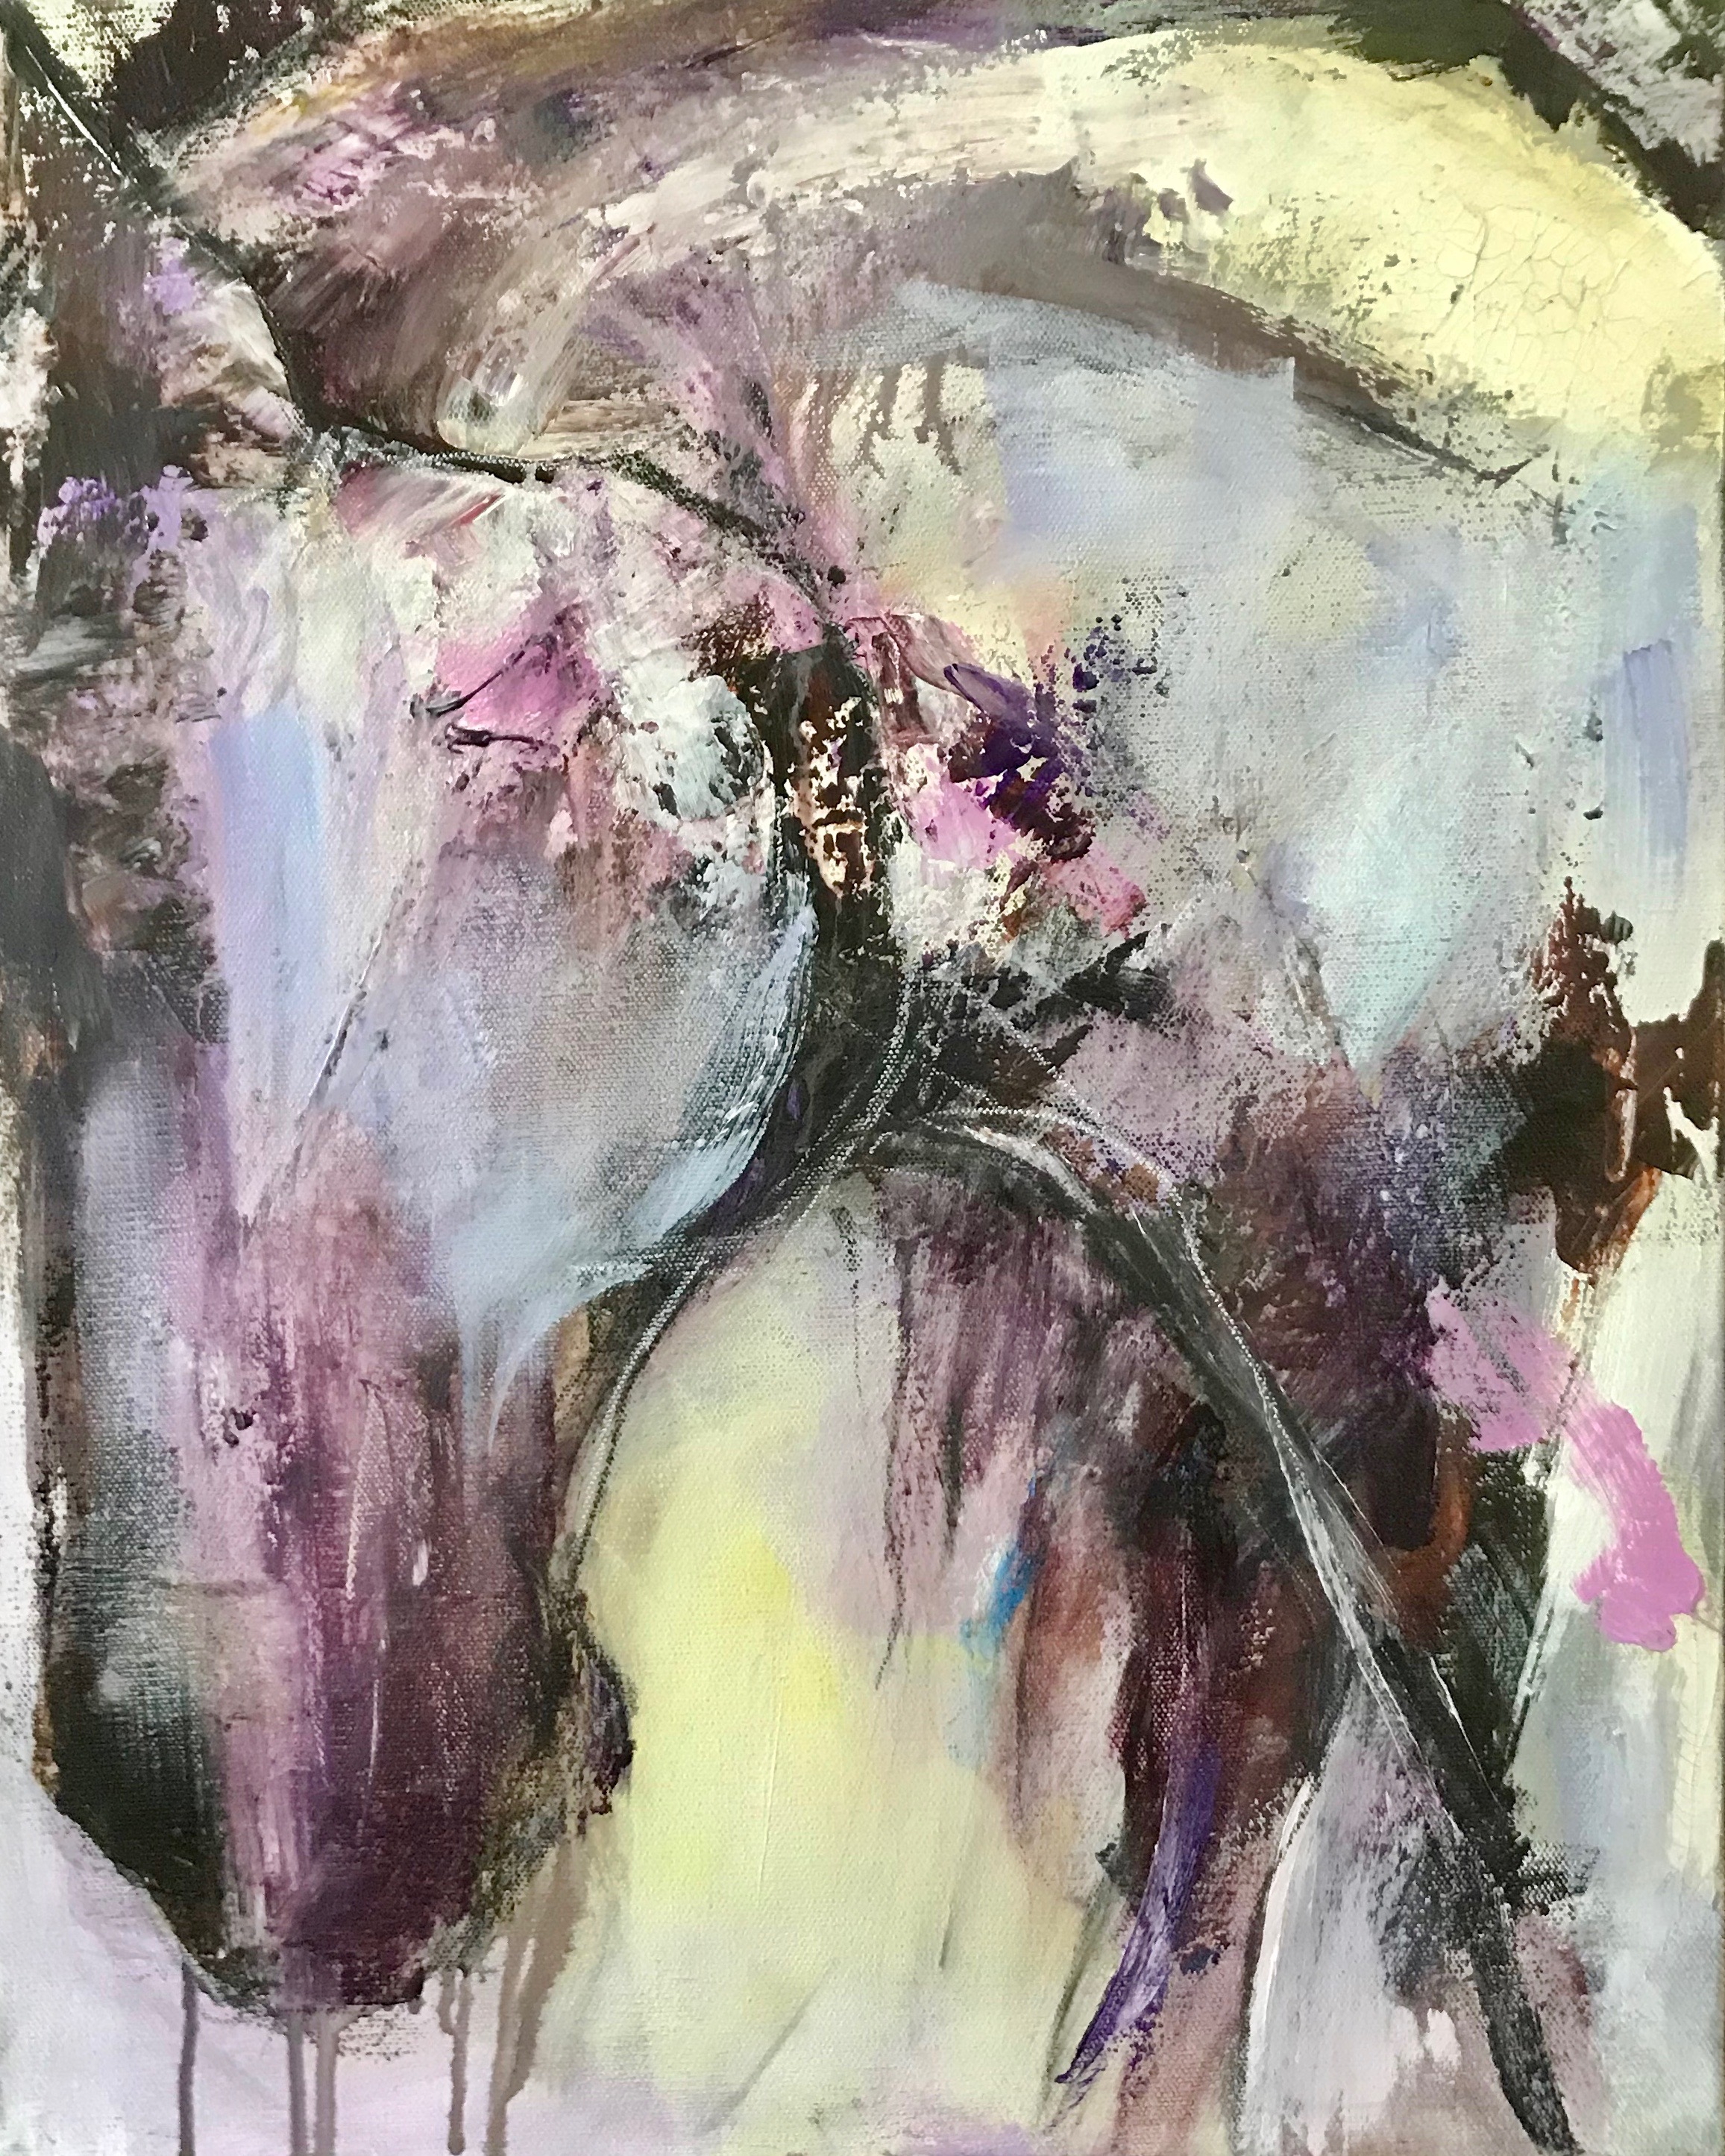 'Violet Vibes' 20x24 in  contemporary modern equine, horse painting by Cher Devereaux on stretched canvas.